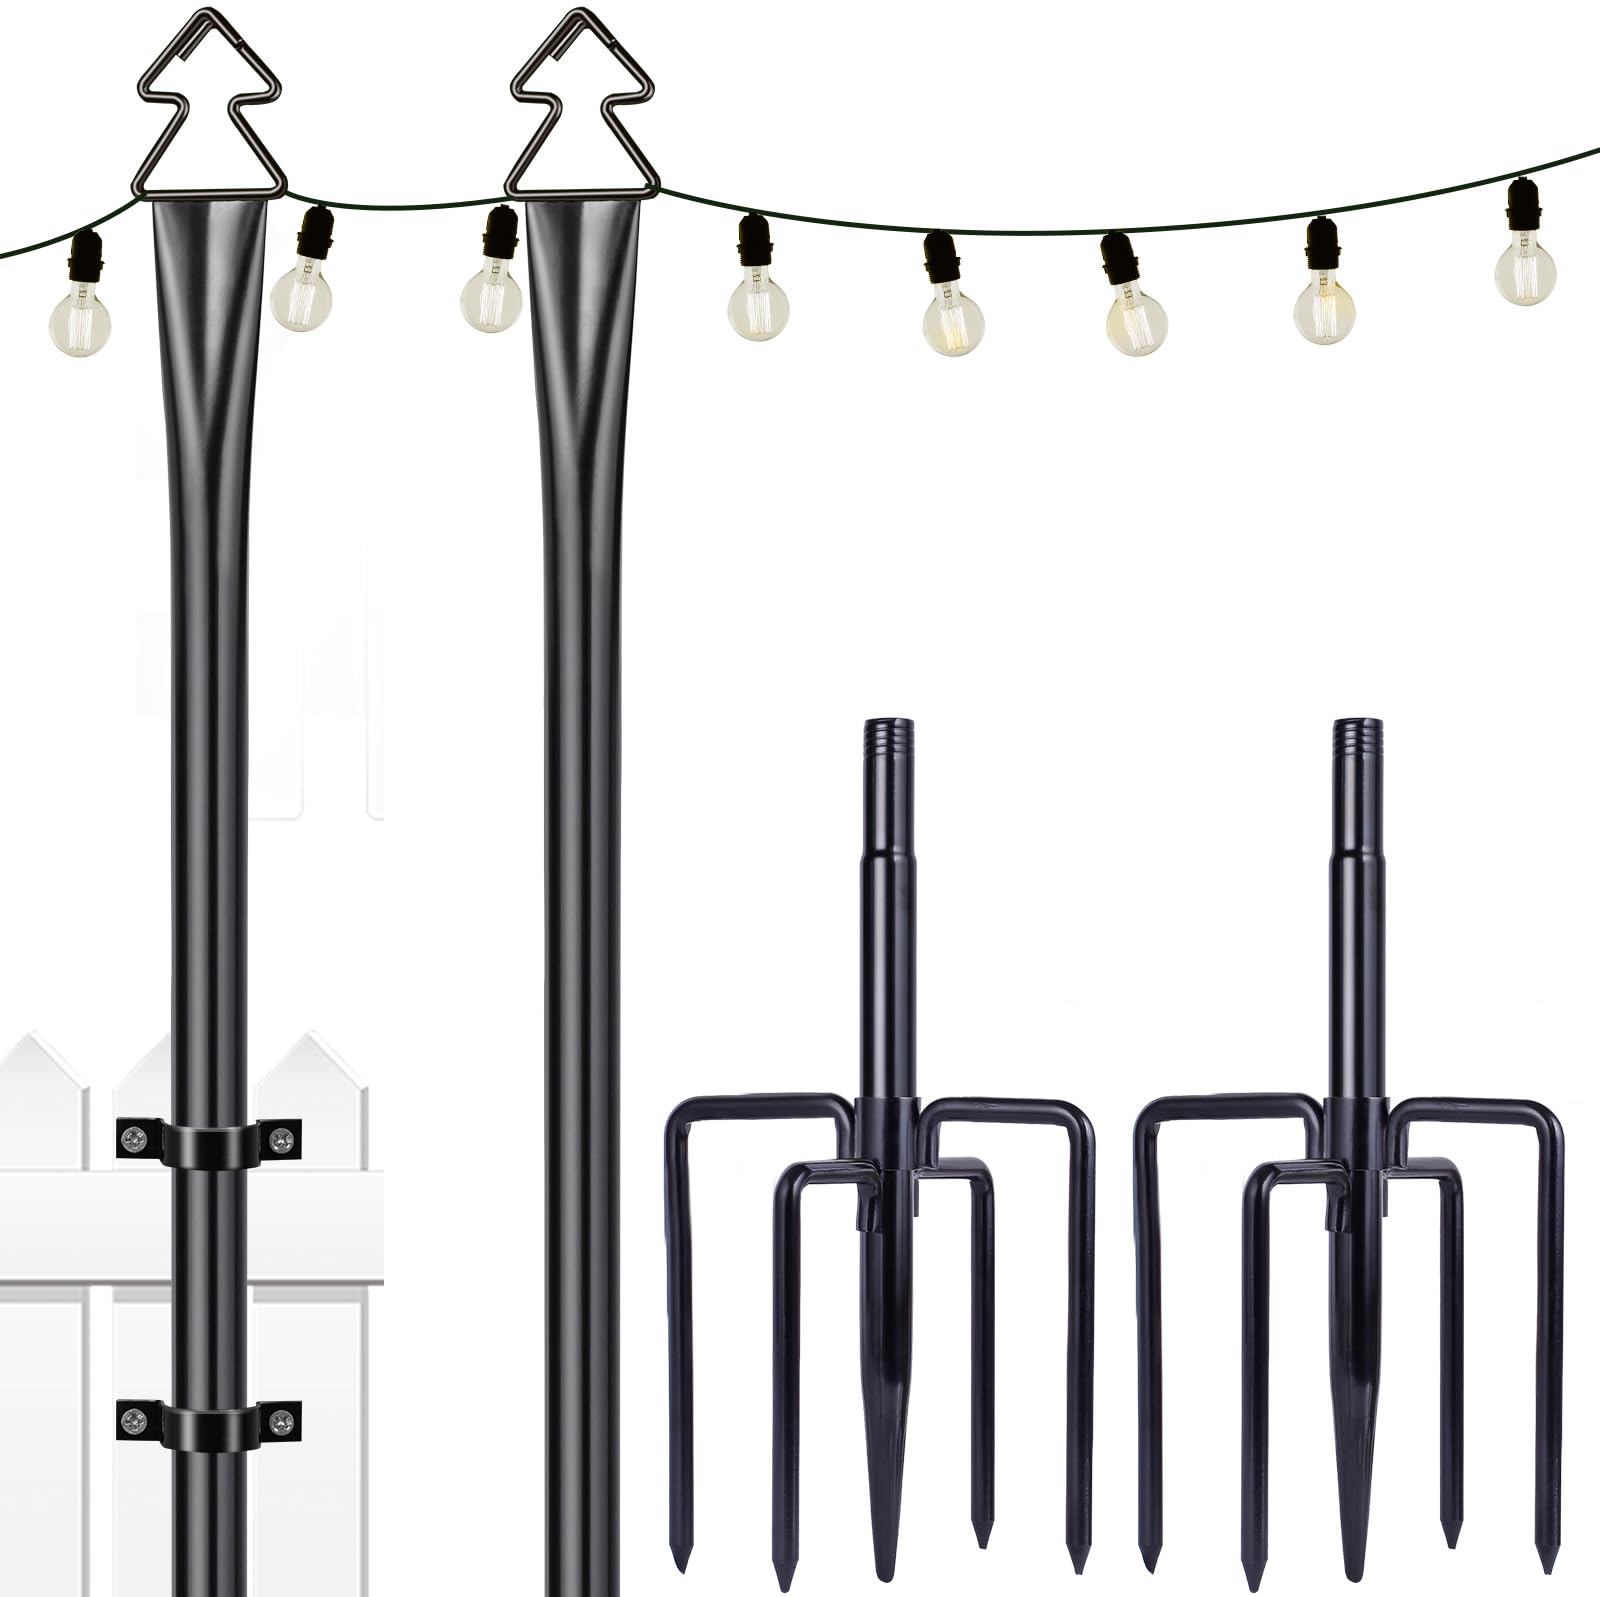 WizSar String Light Poles 2 Pack 9.8FT Light Pole for Outside Hanging - Backyard, Garden, Patio, Deck Lighting Stand for OutdoorParties, Wedding